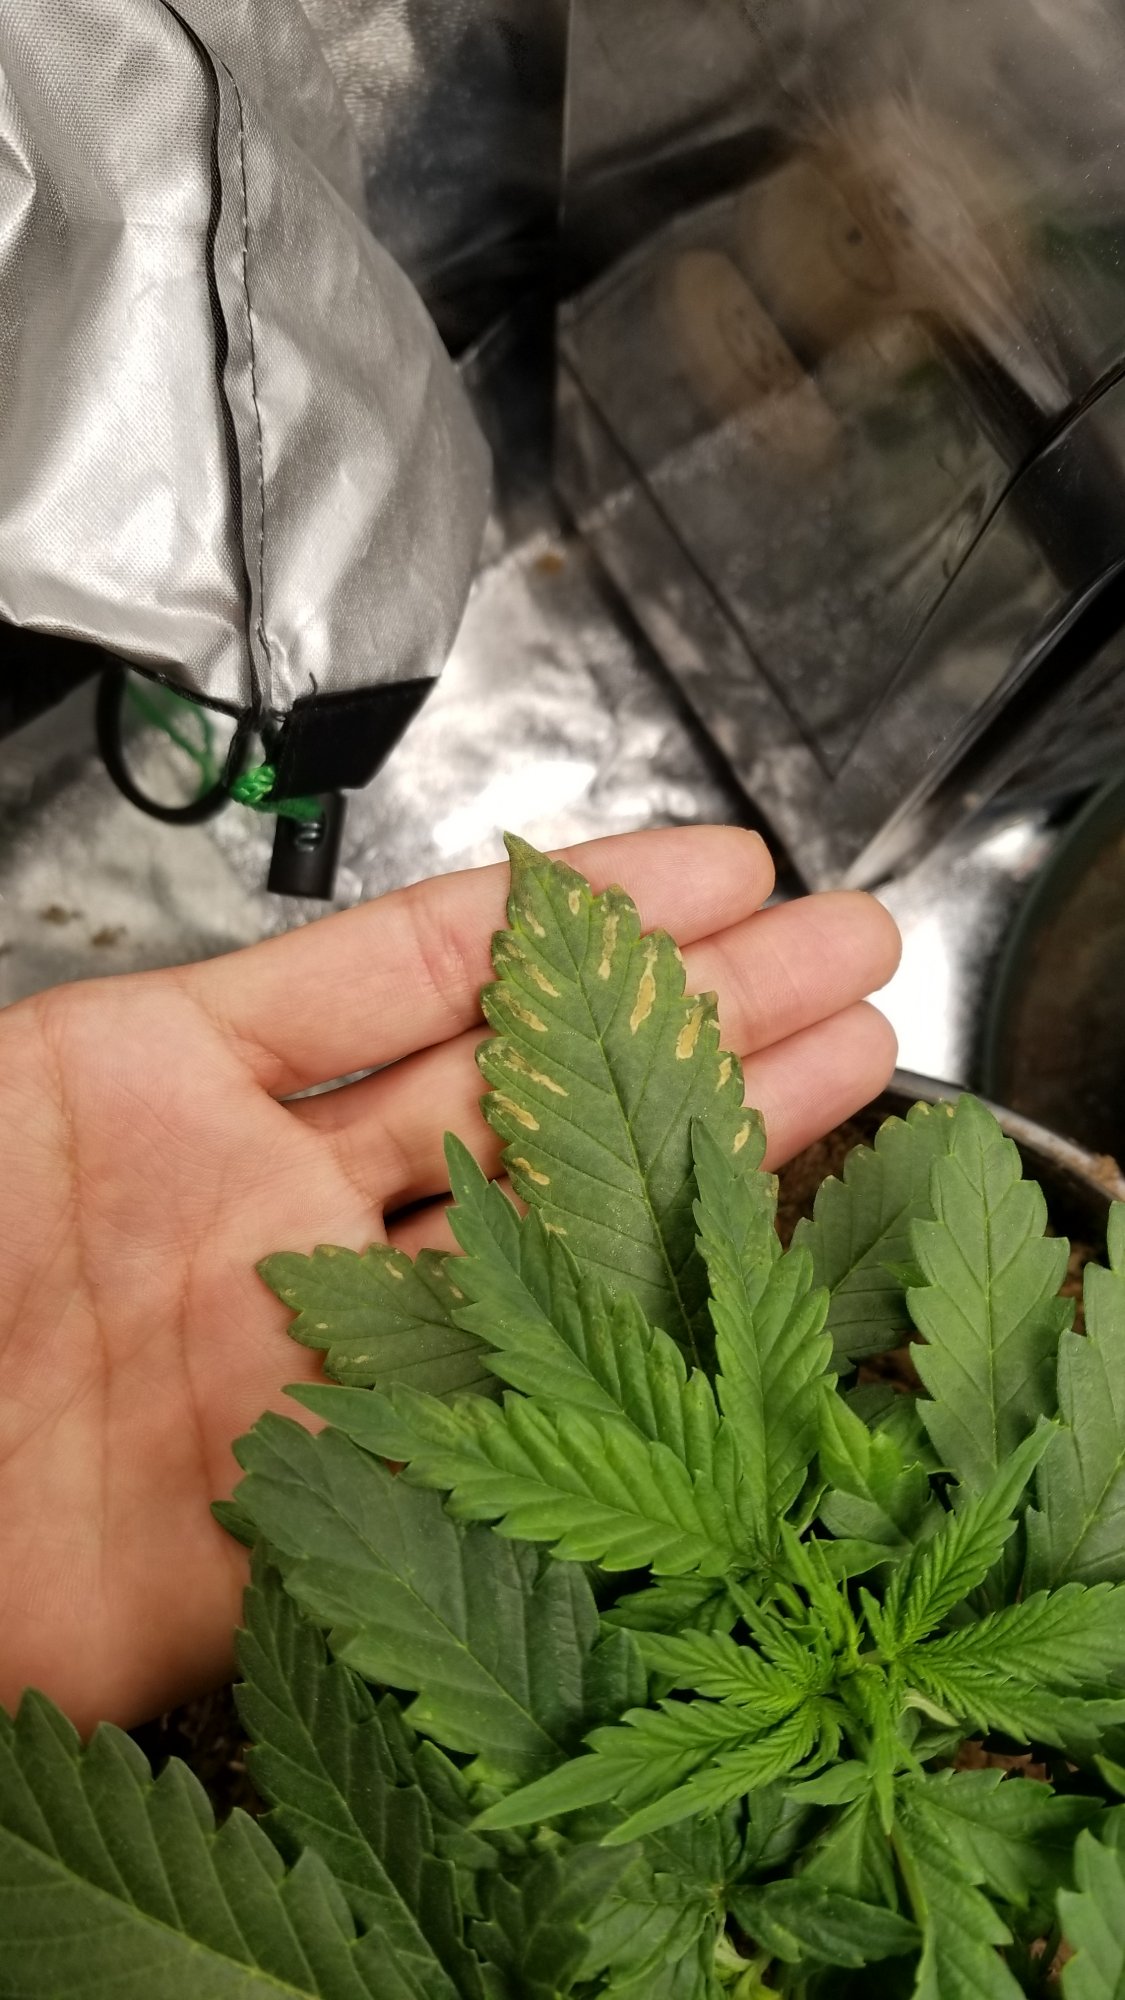 Can my fellow growers help me with this